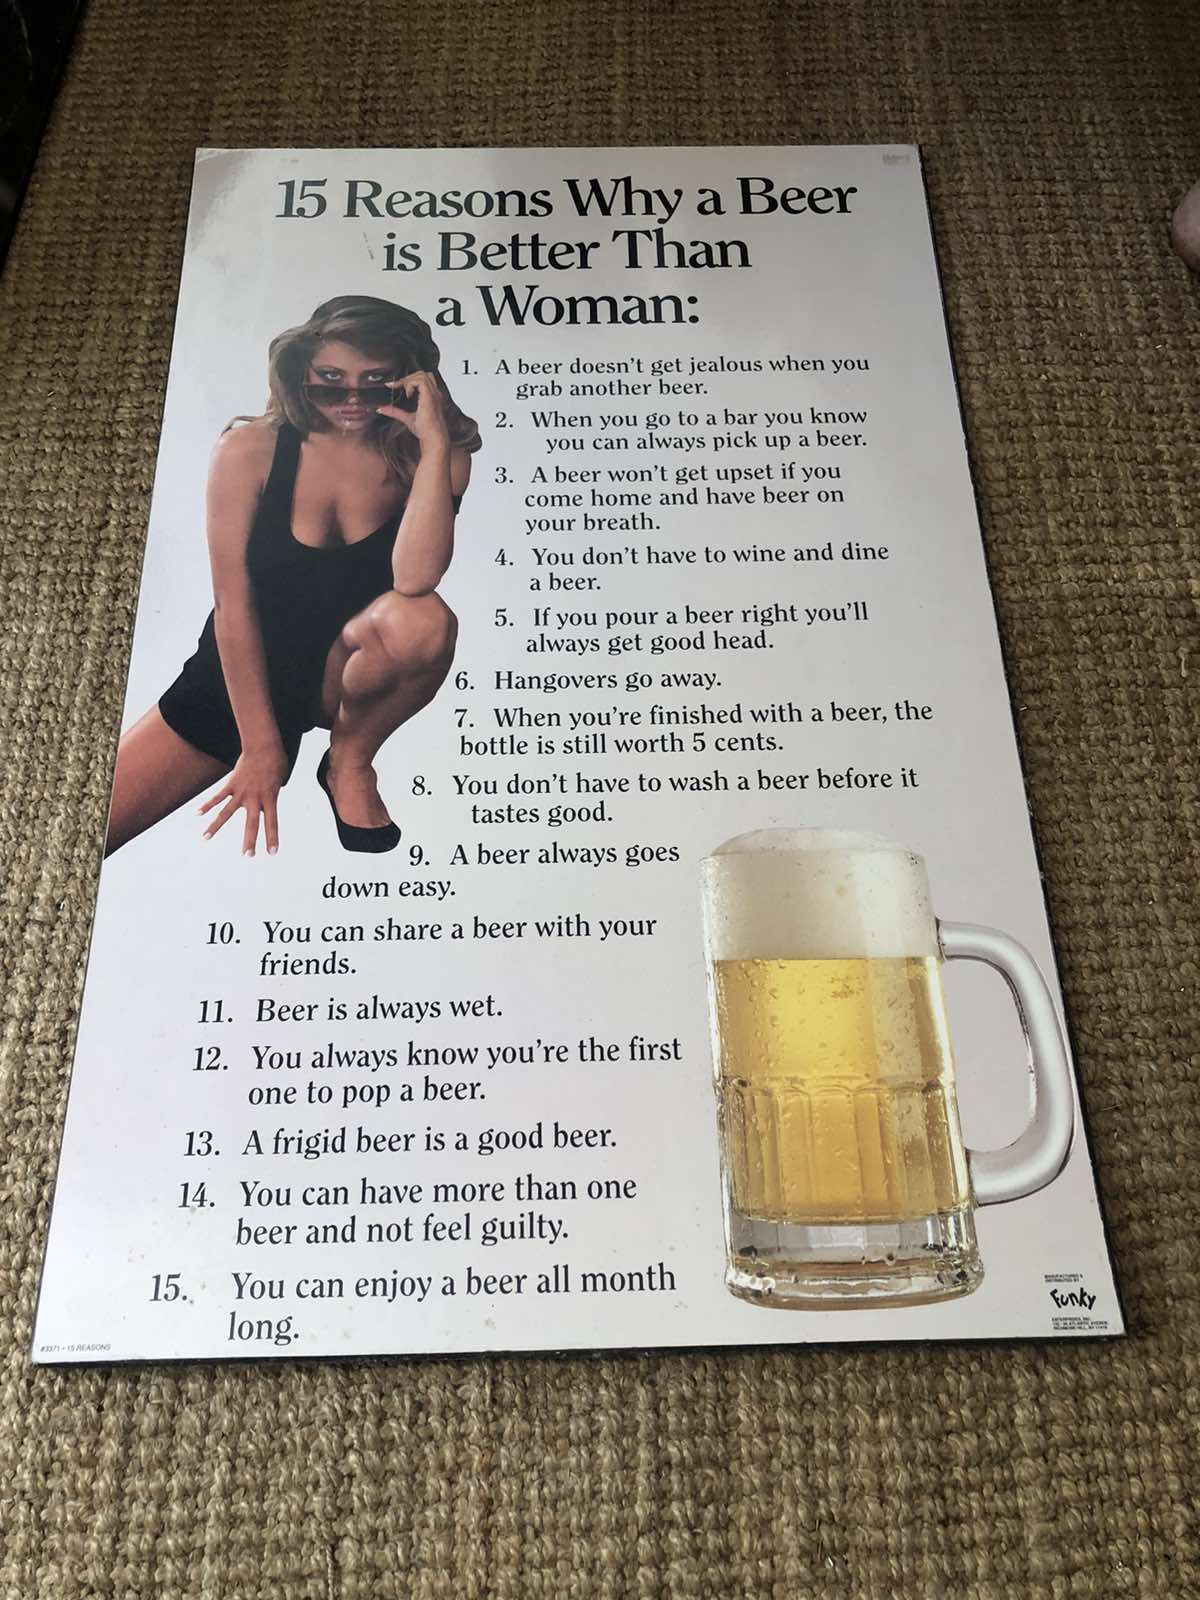 Sexist mancave poster on board 80's/90's